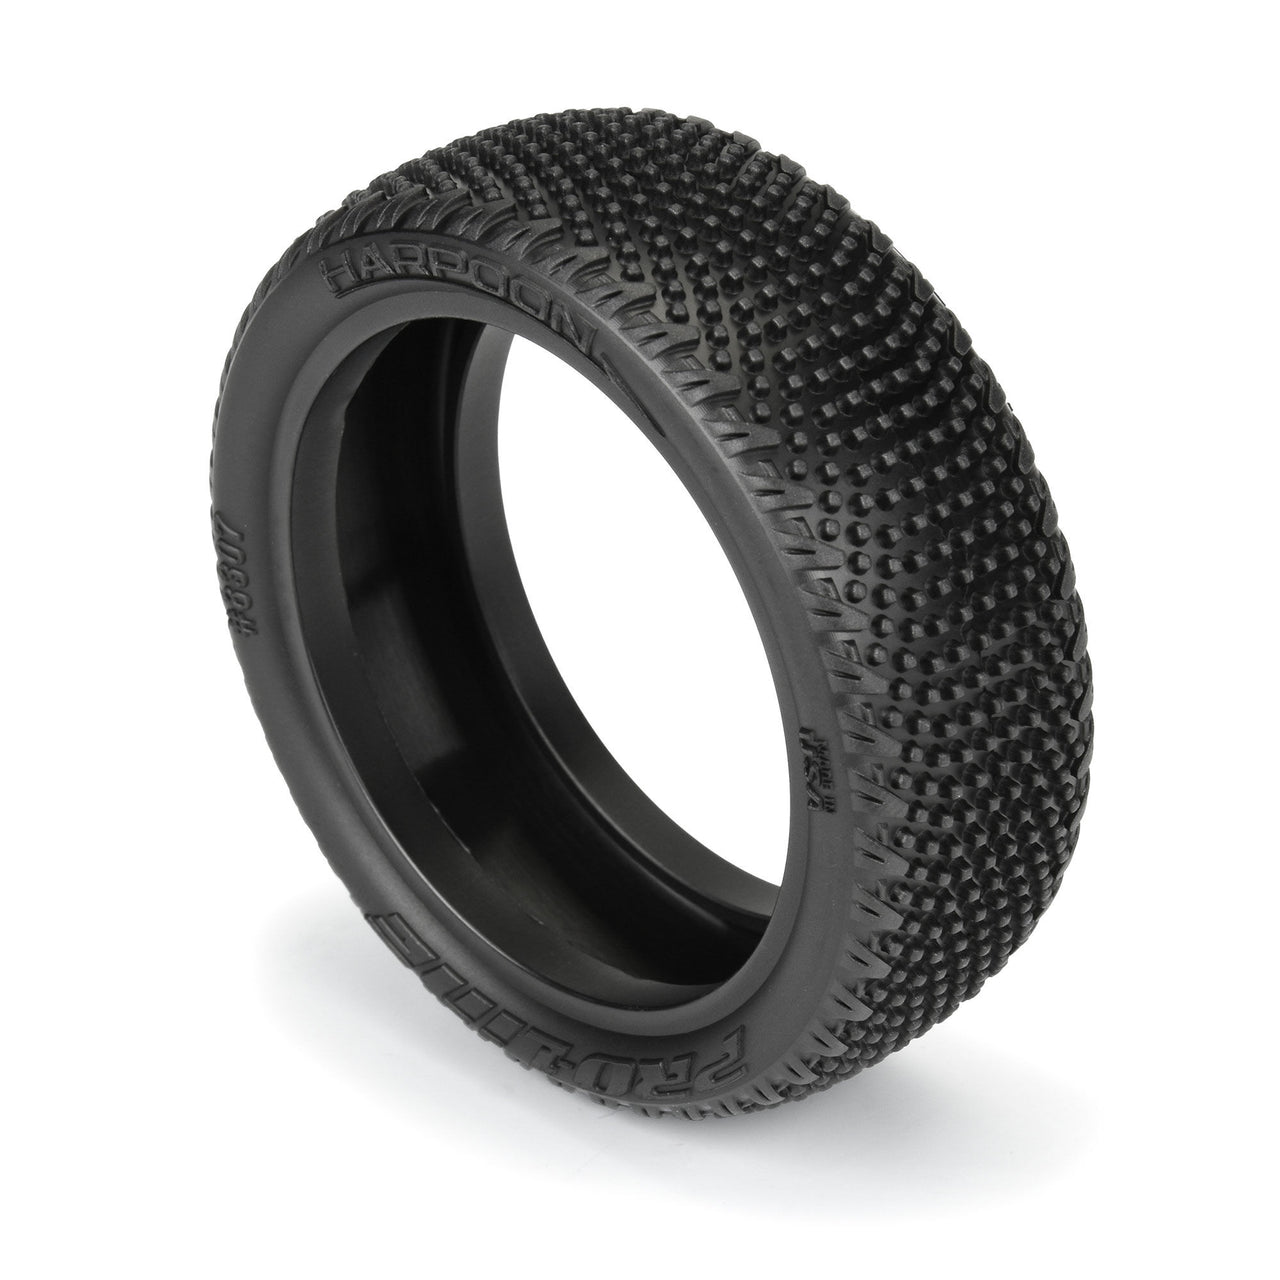 PRO8307303 1/10 Harpoon CR3 4WD Front 2.2" Carpet Buggy Tires (2)